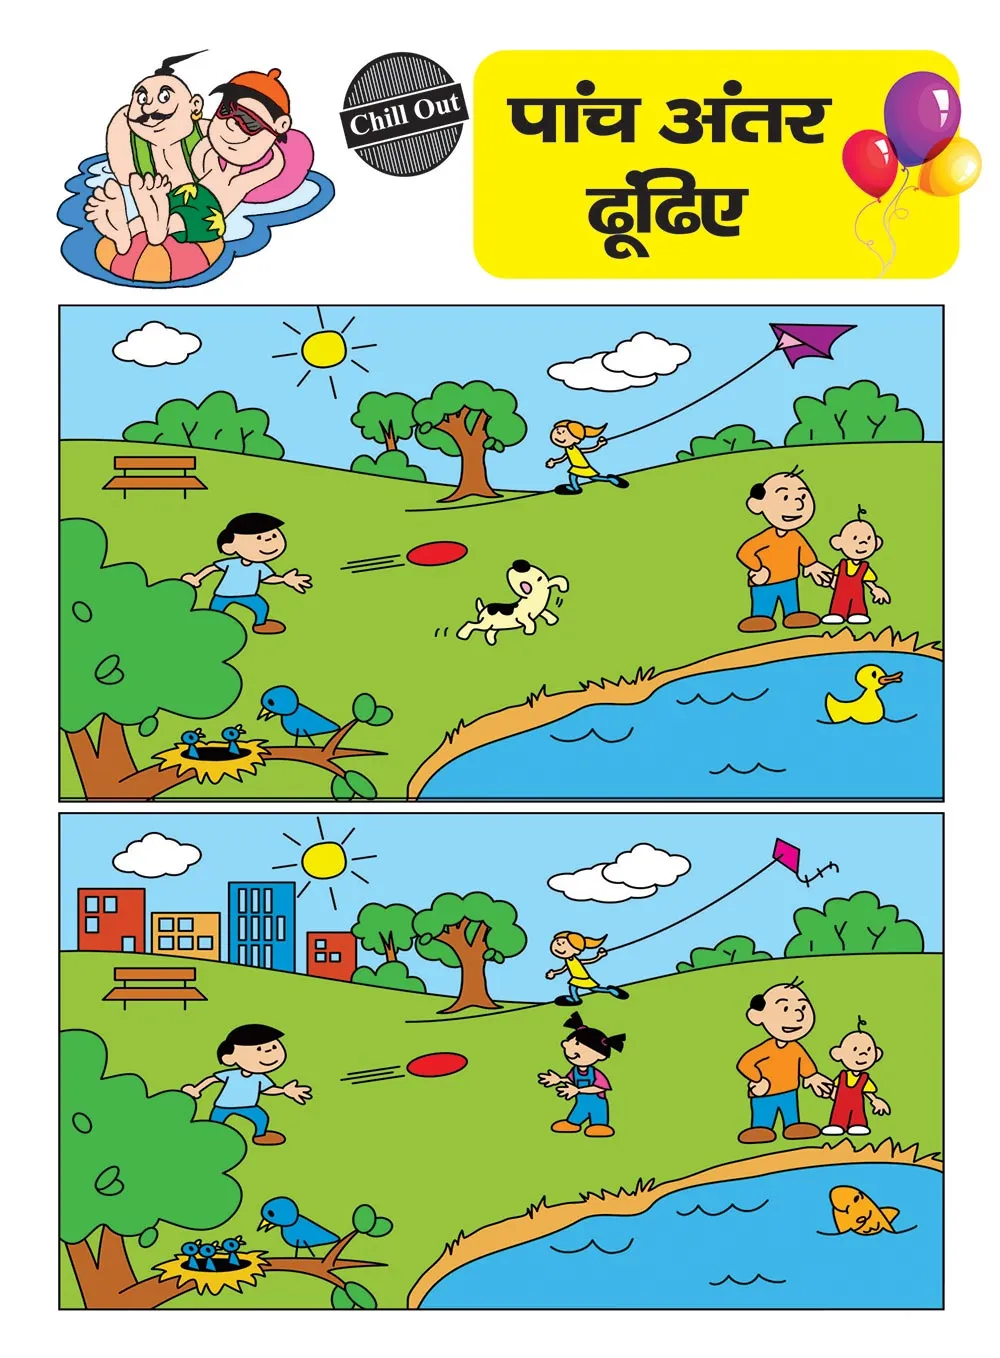 Find the Differences | अंतर ढूँढिए -5